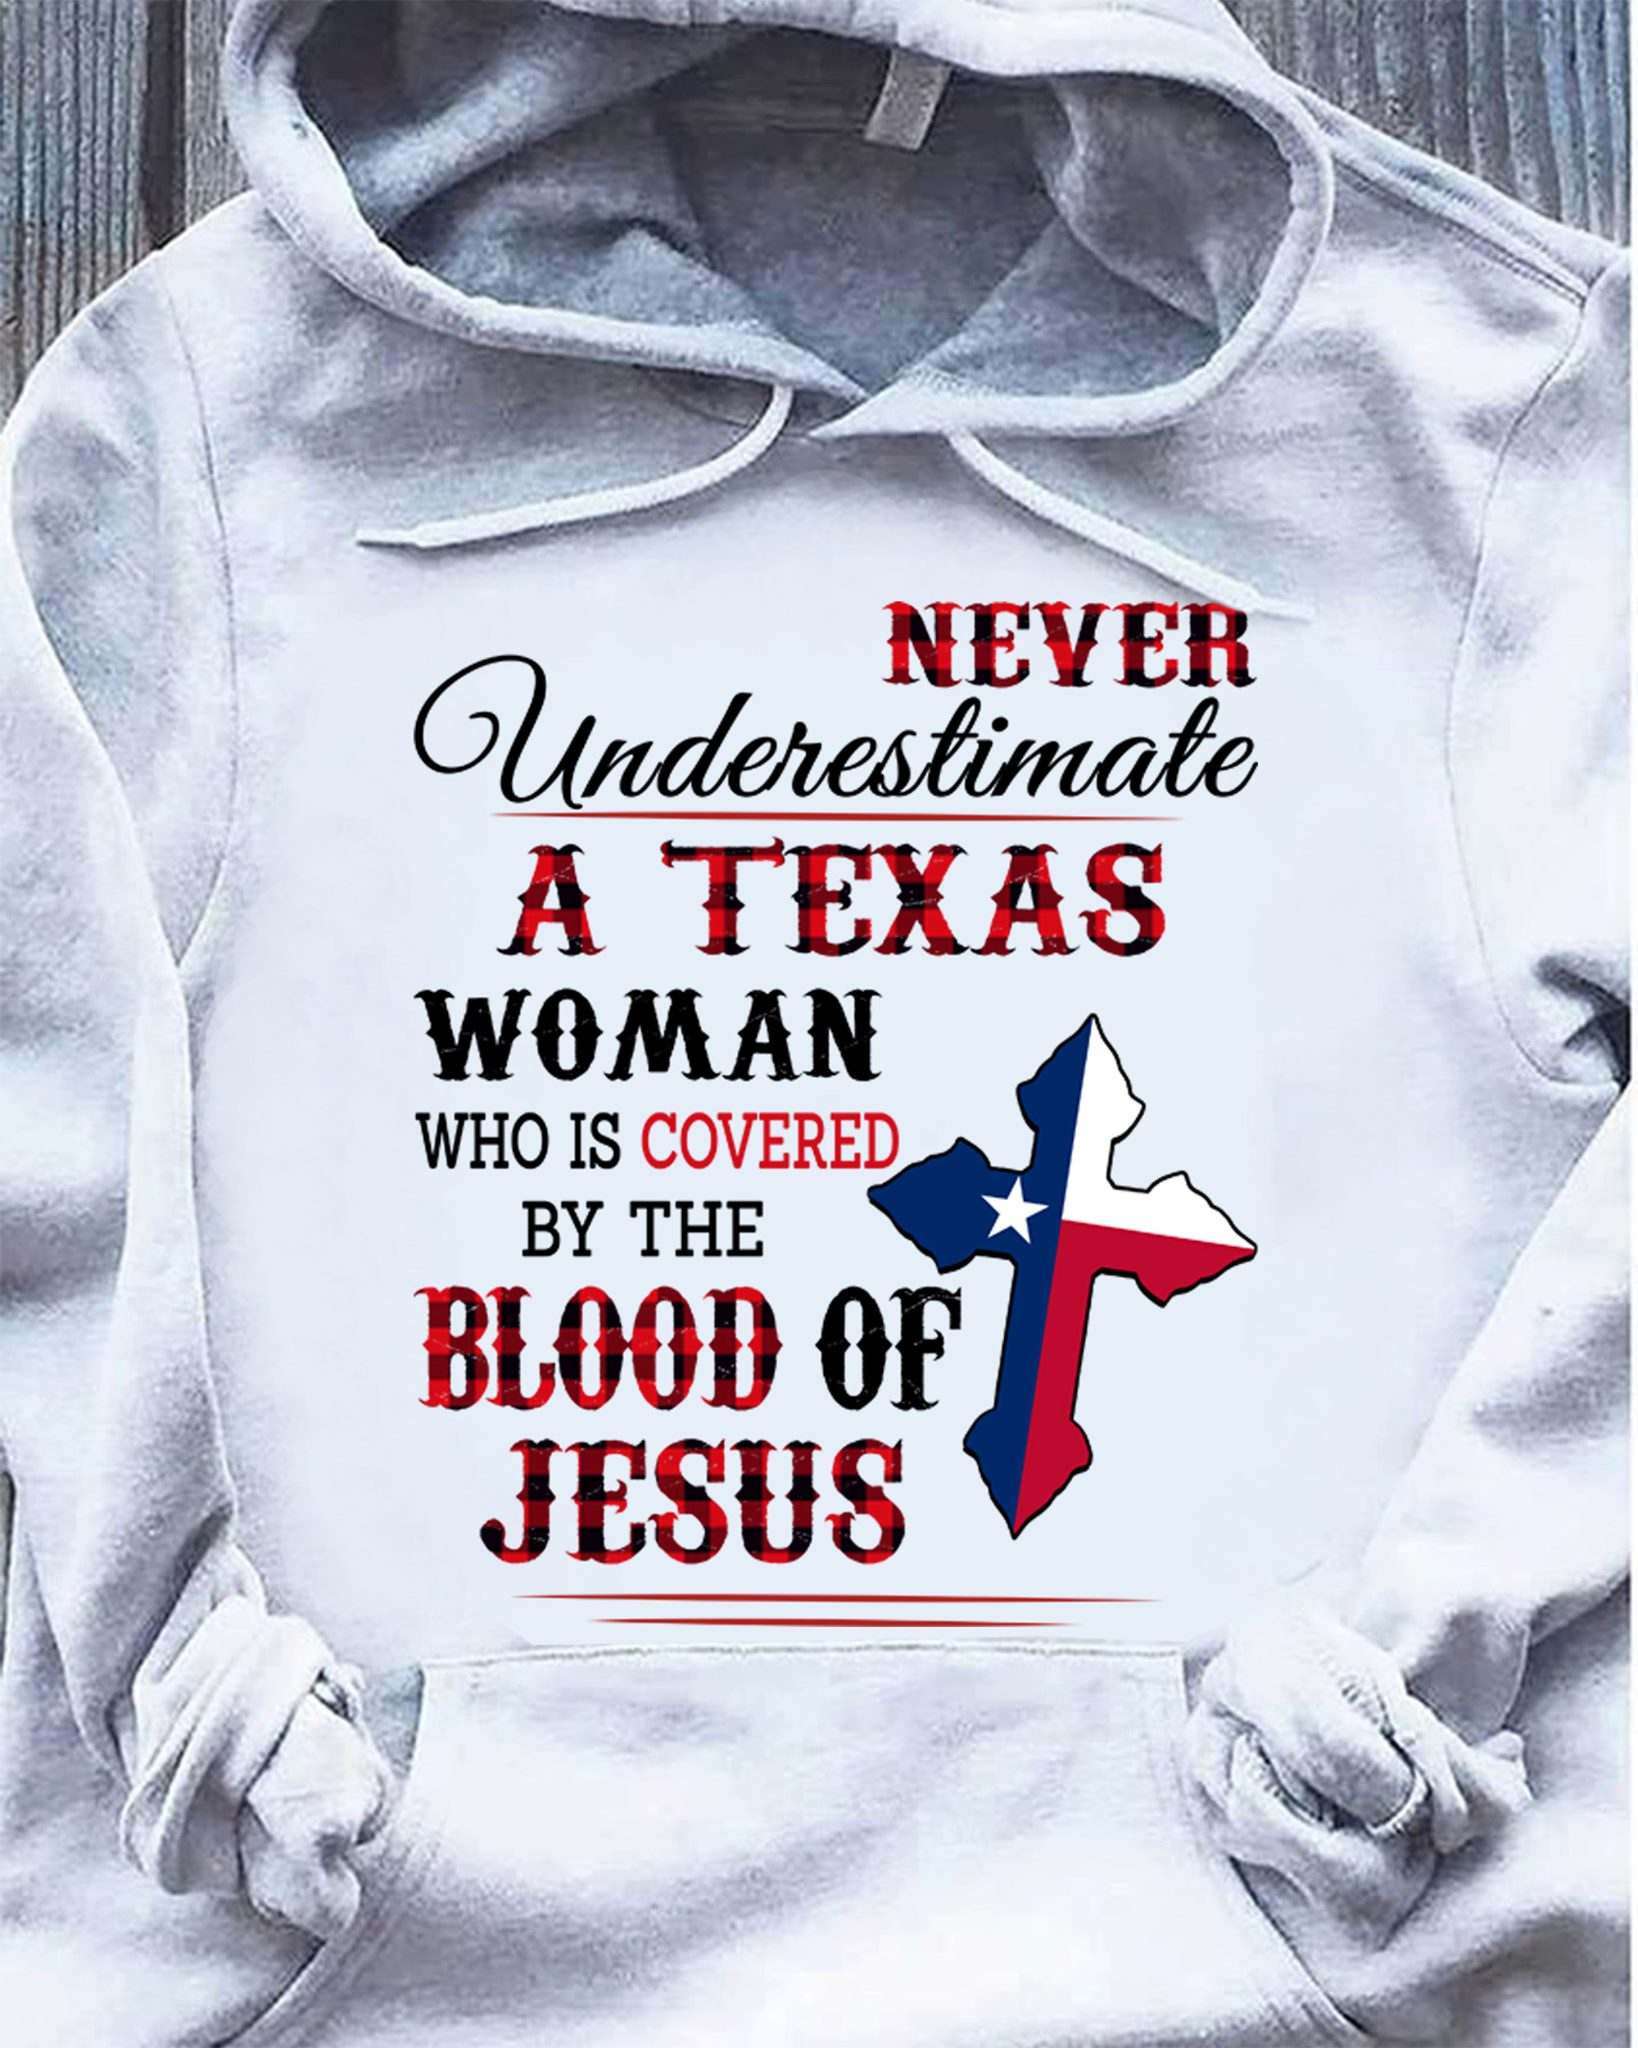 Never underestimate a Texas woman who is covered by the blood of Jesus - Texas flag